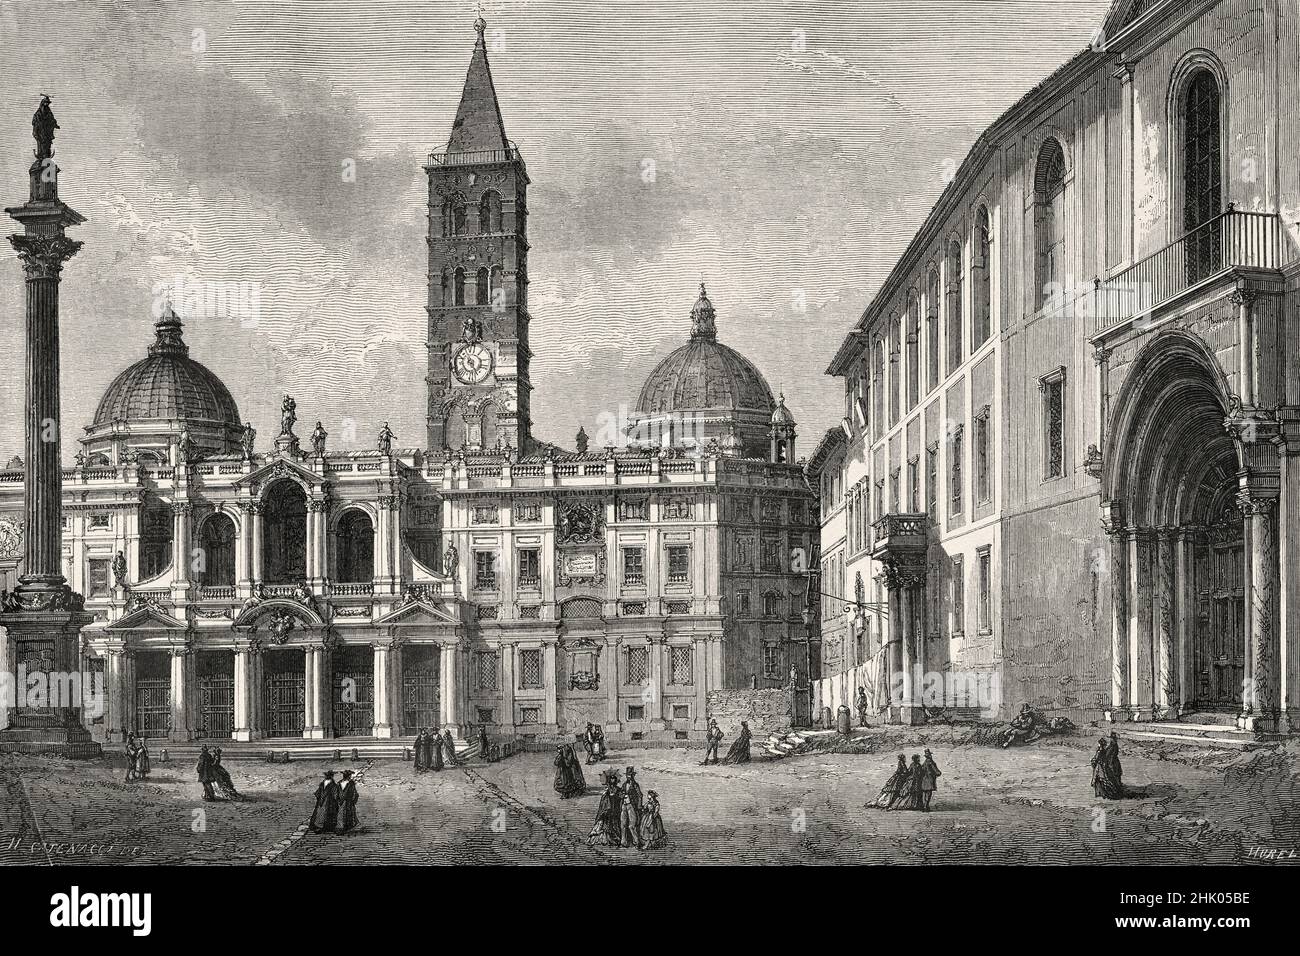 Basilica Santa Maria maggiore and Saint Anthony convent, Rome. Italy, Europe. Old 19th century engraved illustration from Trip to Rome by Francis Wey, Le Tour du Monde 1870 Stock Photo